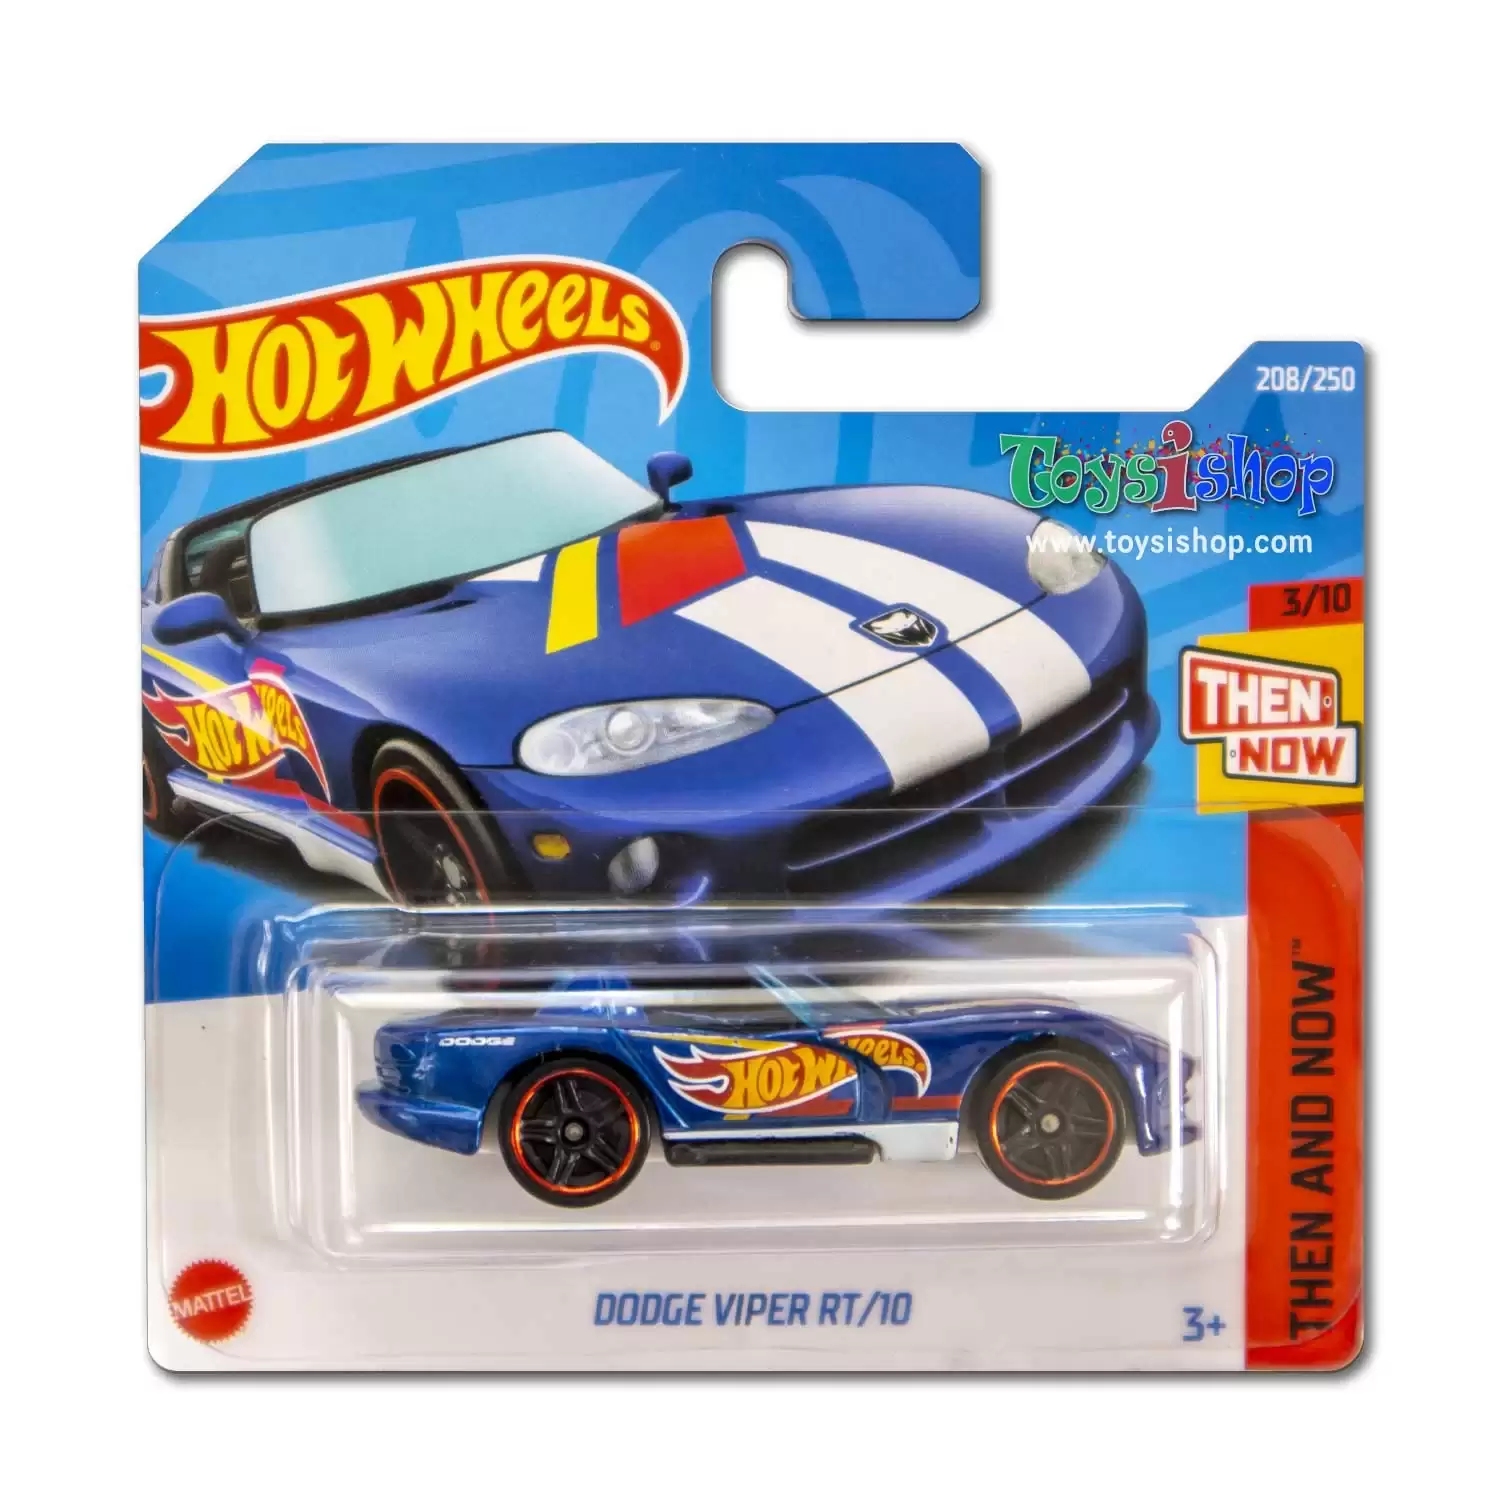 Hot Wheels Dodge Viper RT/10 - Then And Now - 208